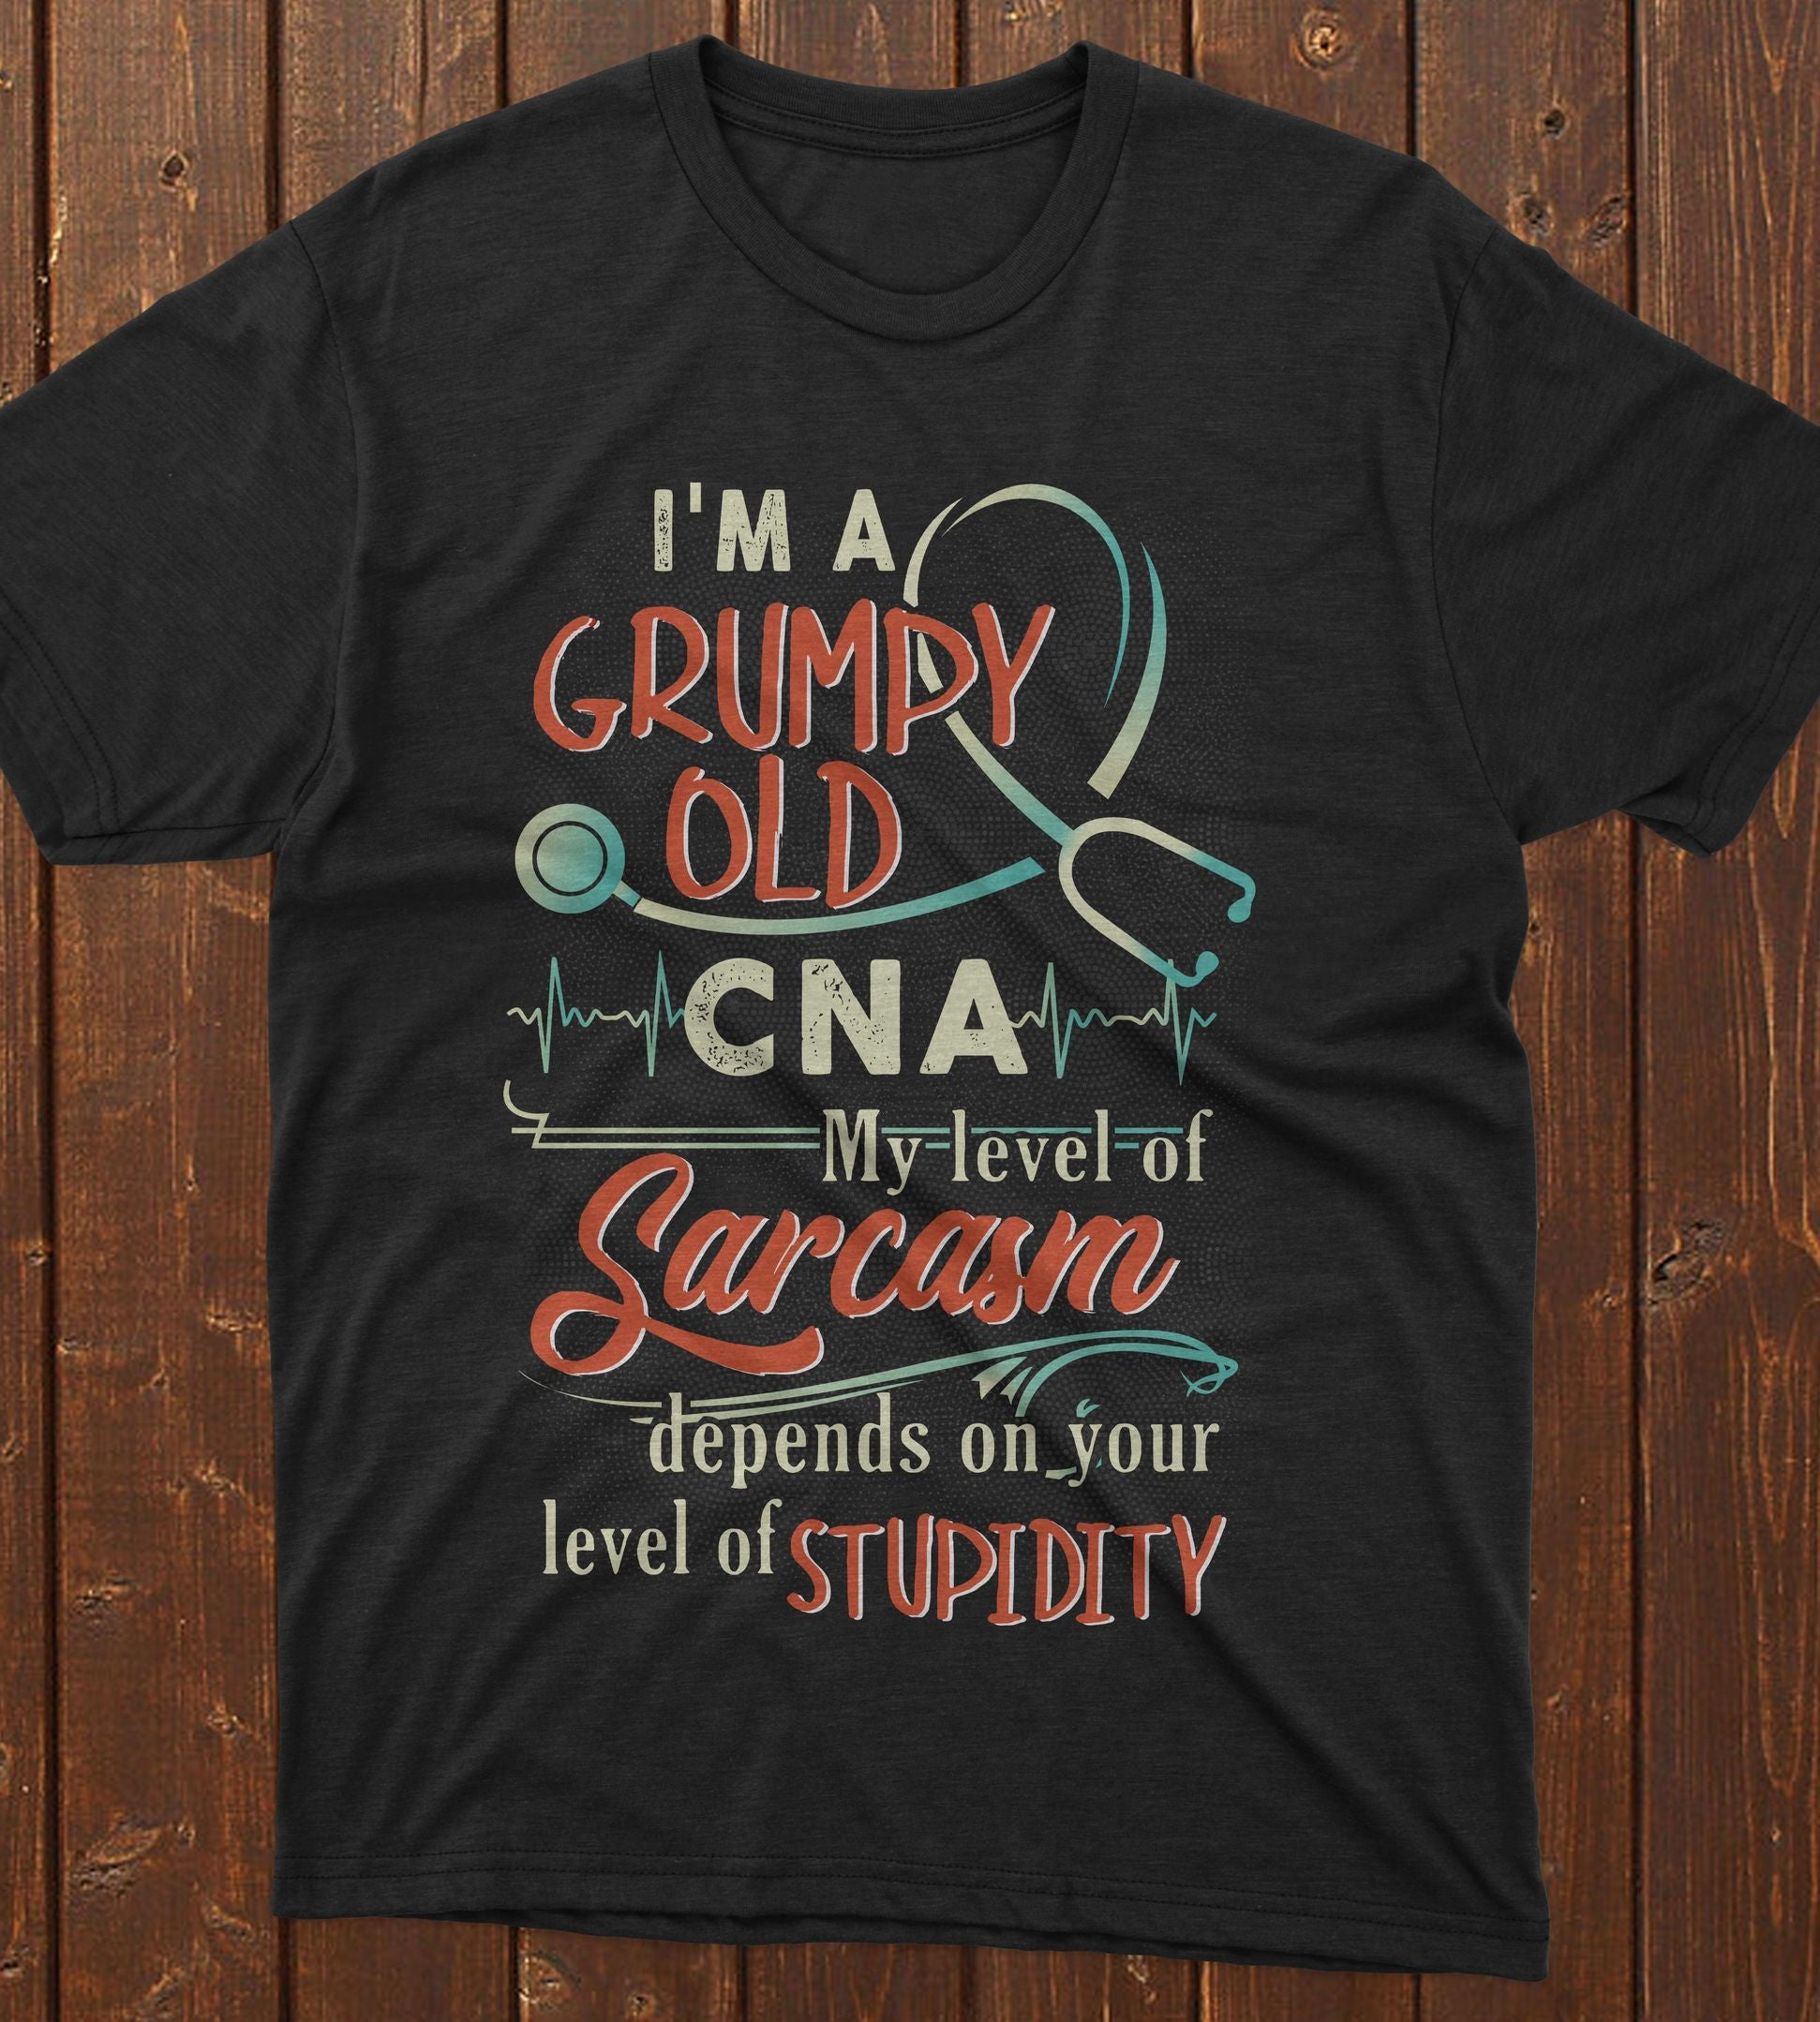 PresentsPrints, Nurse's day i'm a grumpy old CNA my level of sarcasm depends on your level of stupidity, Nurse T-Shirt